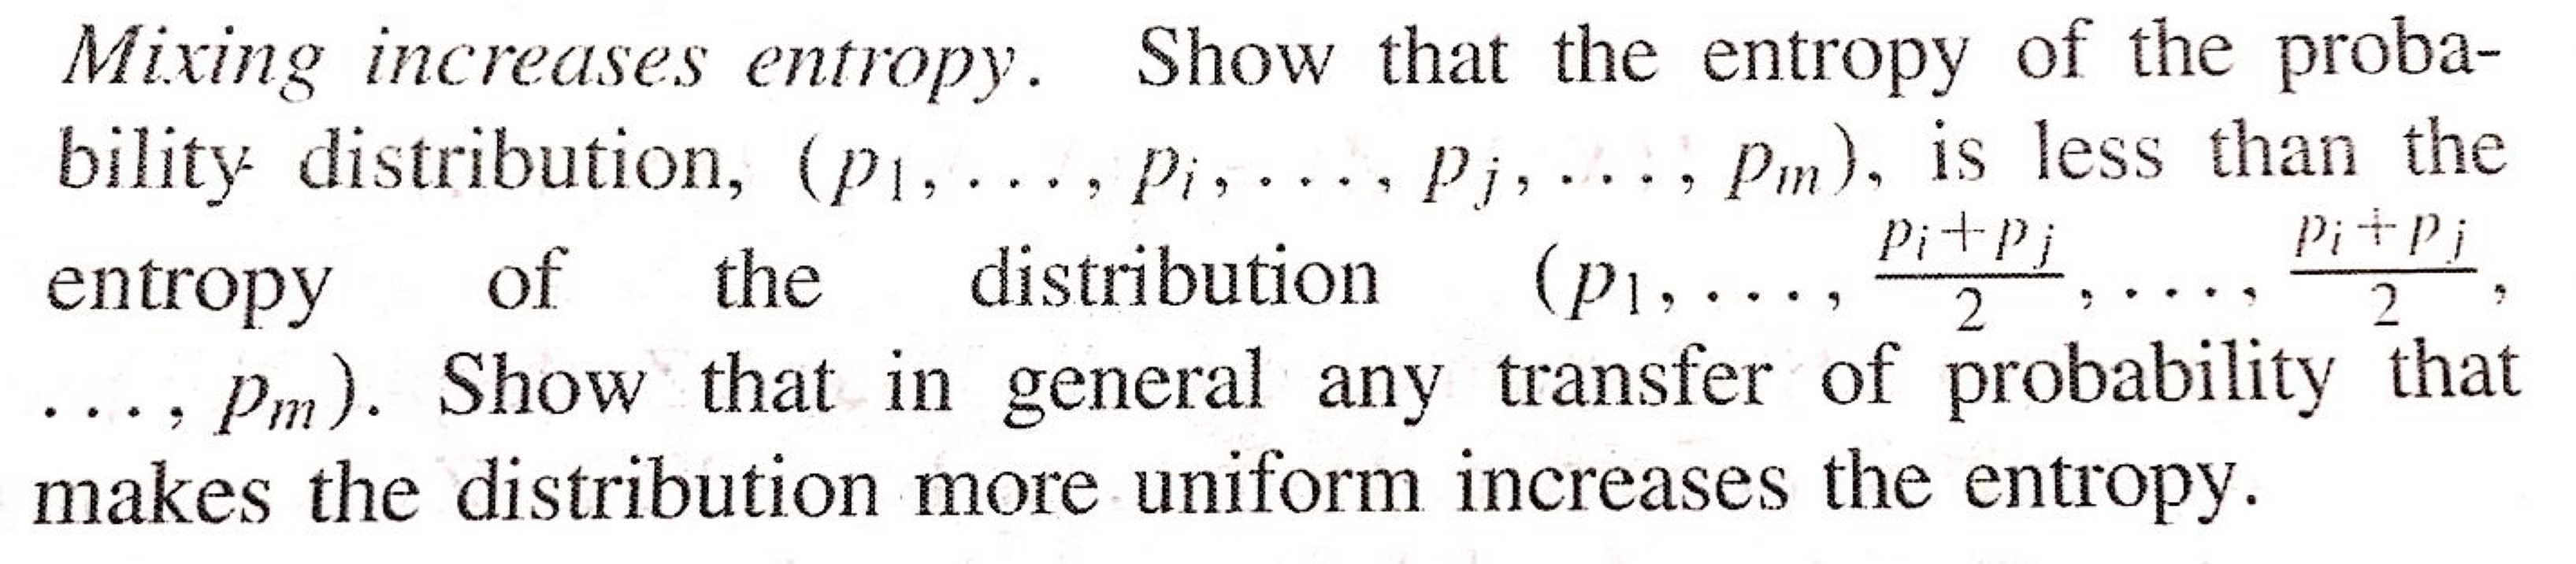 Mixing increases entropy. Show that the entropy of the proba- bility distribution, (P1, ..., Pi, Pj, , Pm),